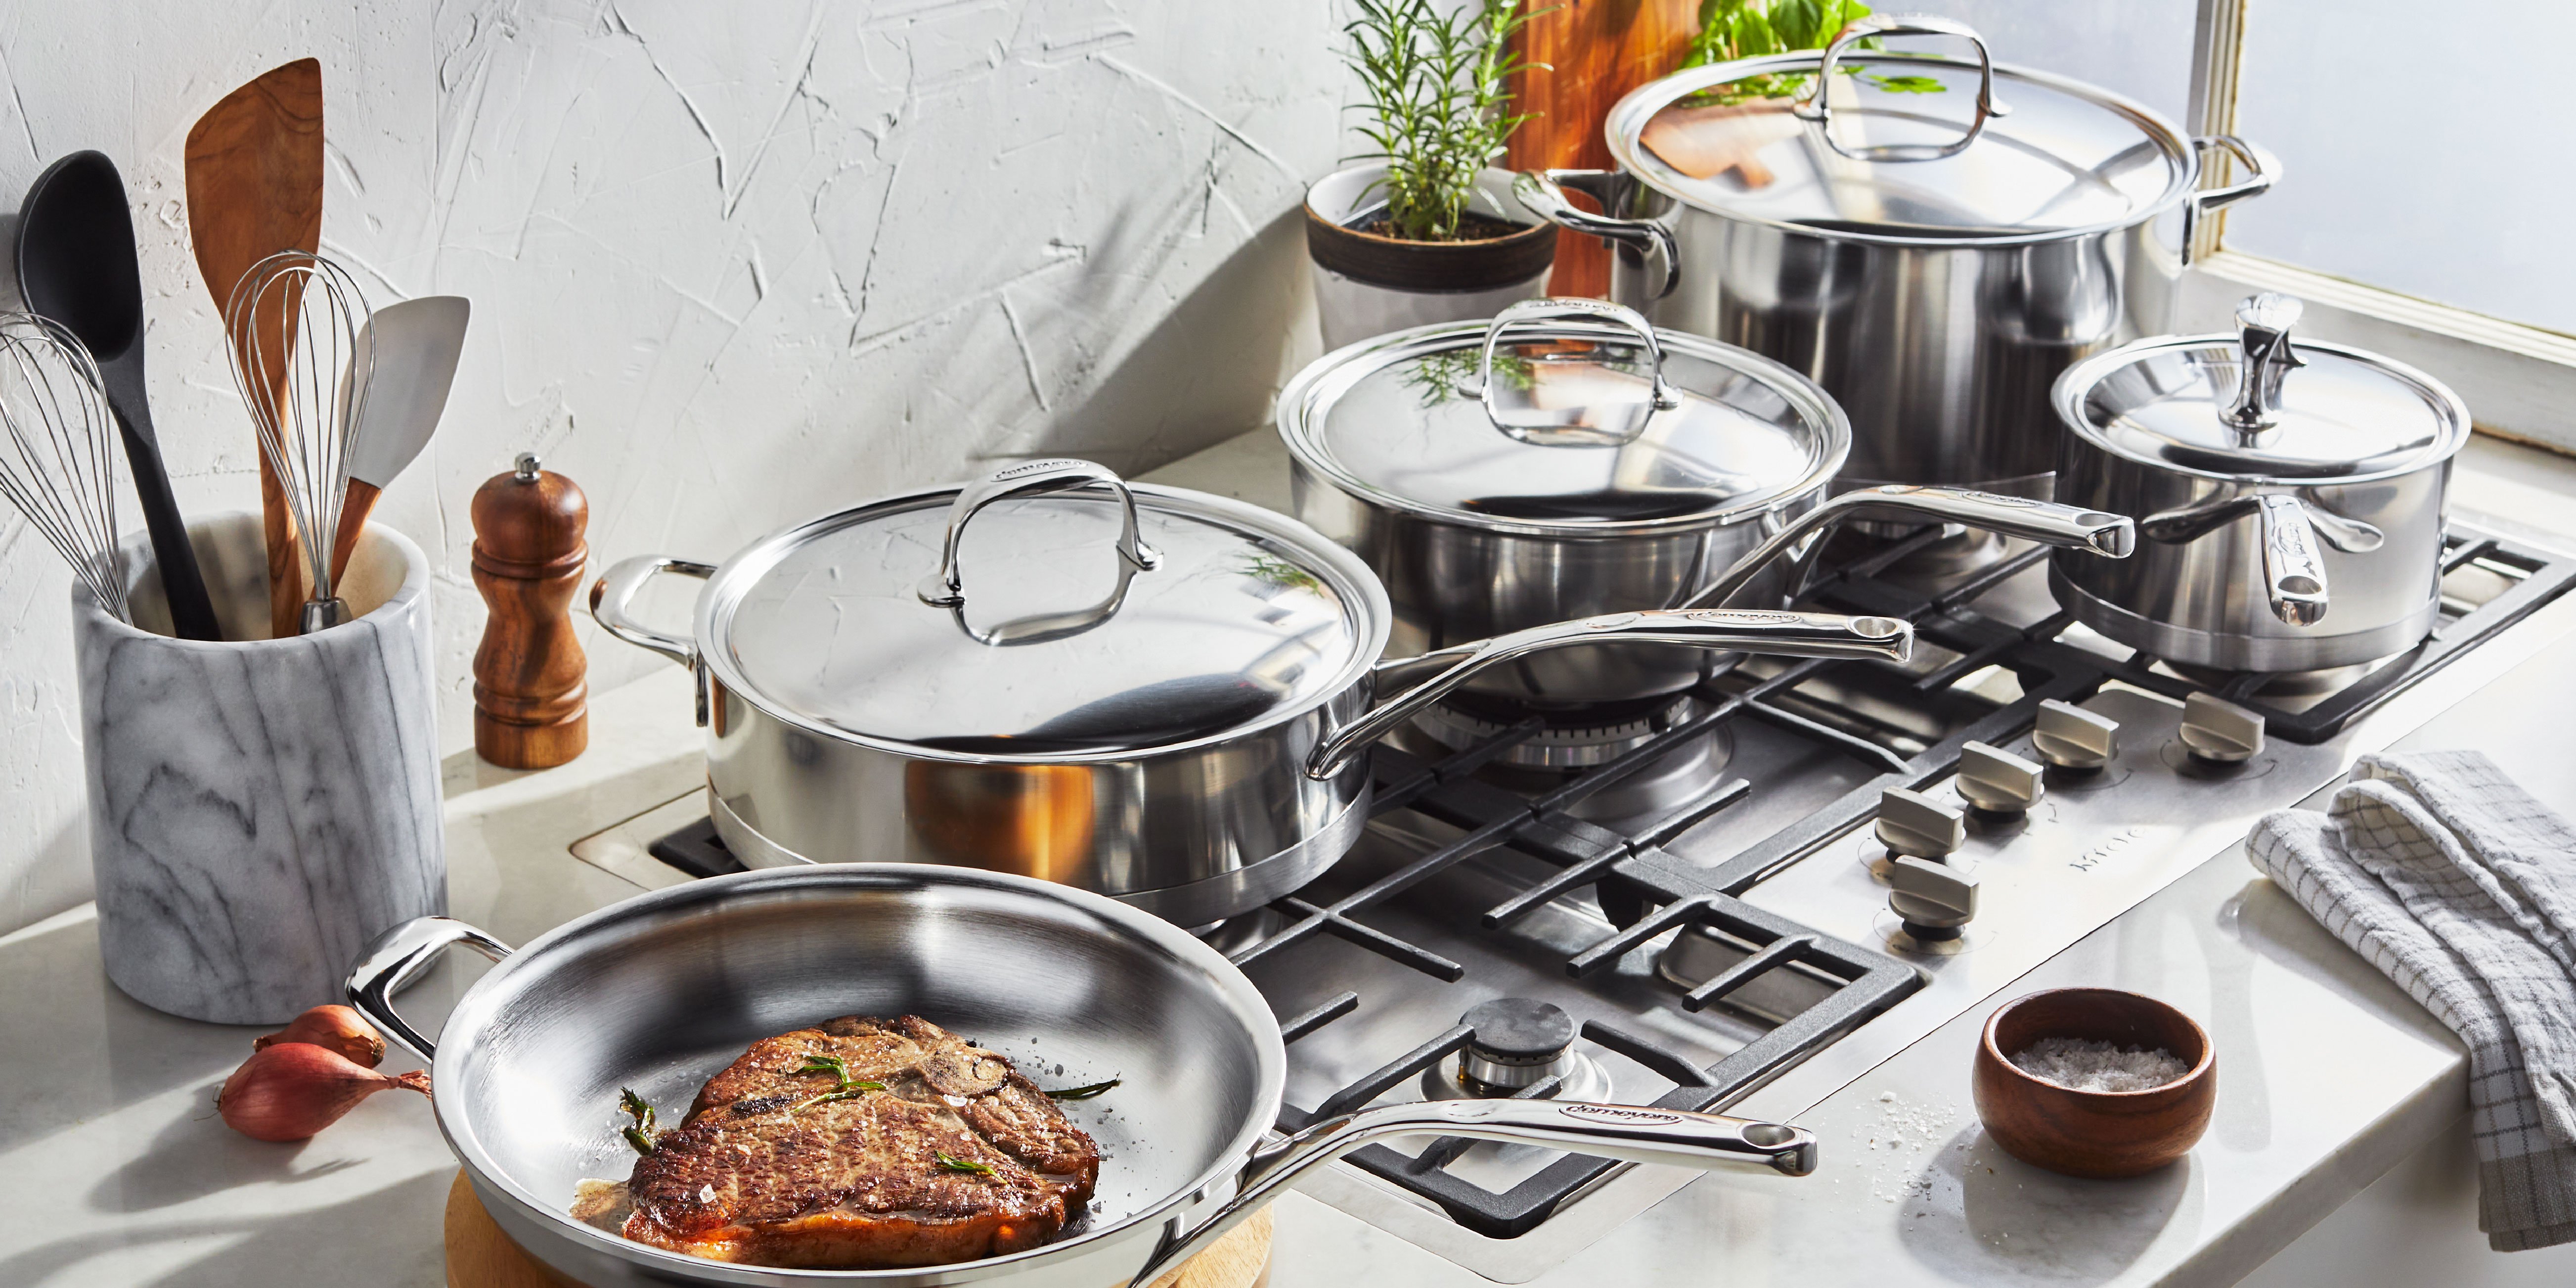 Cookware Zwilling enfinigy Pro • shop